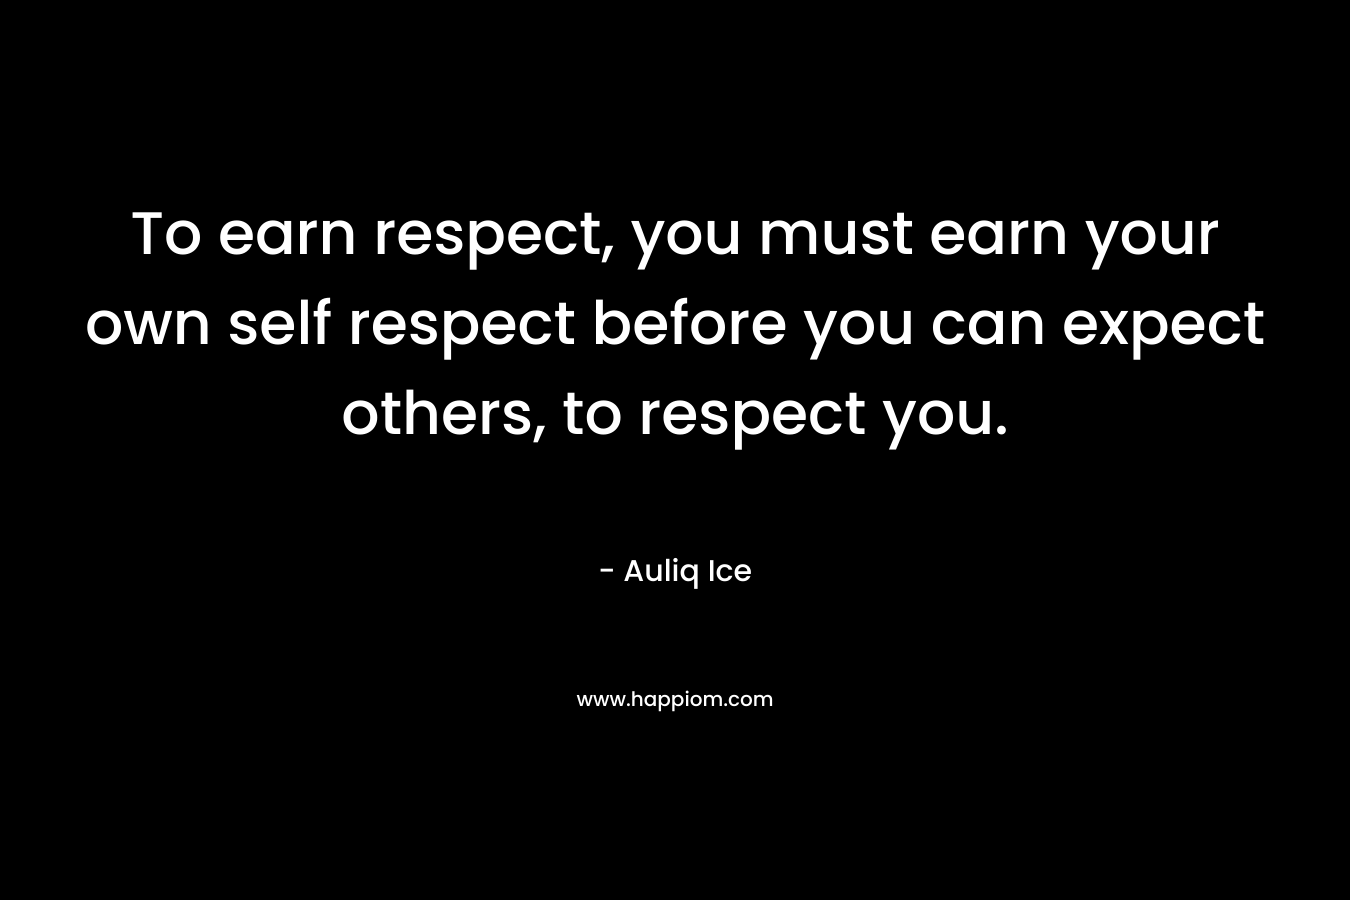 To earn respect, you must earn your own self respect before you can expect others, to respect you.